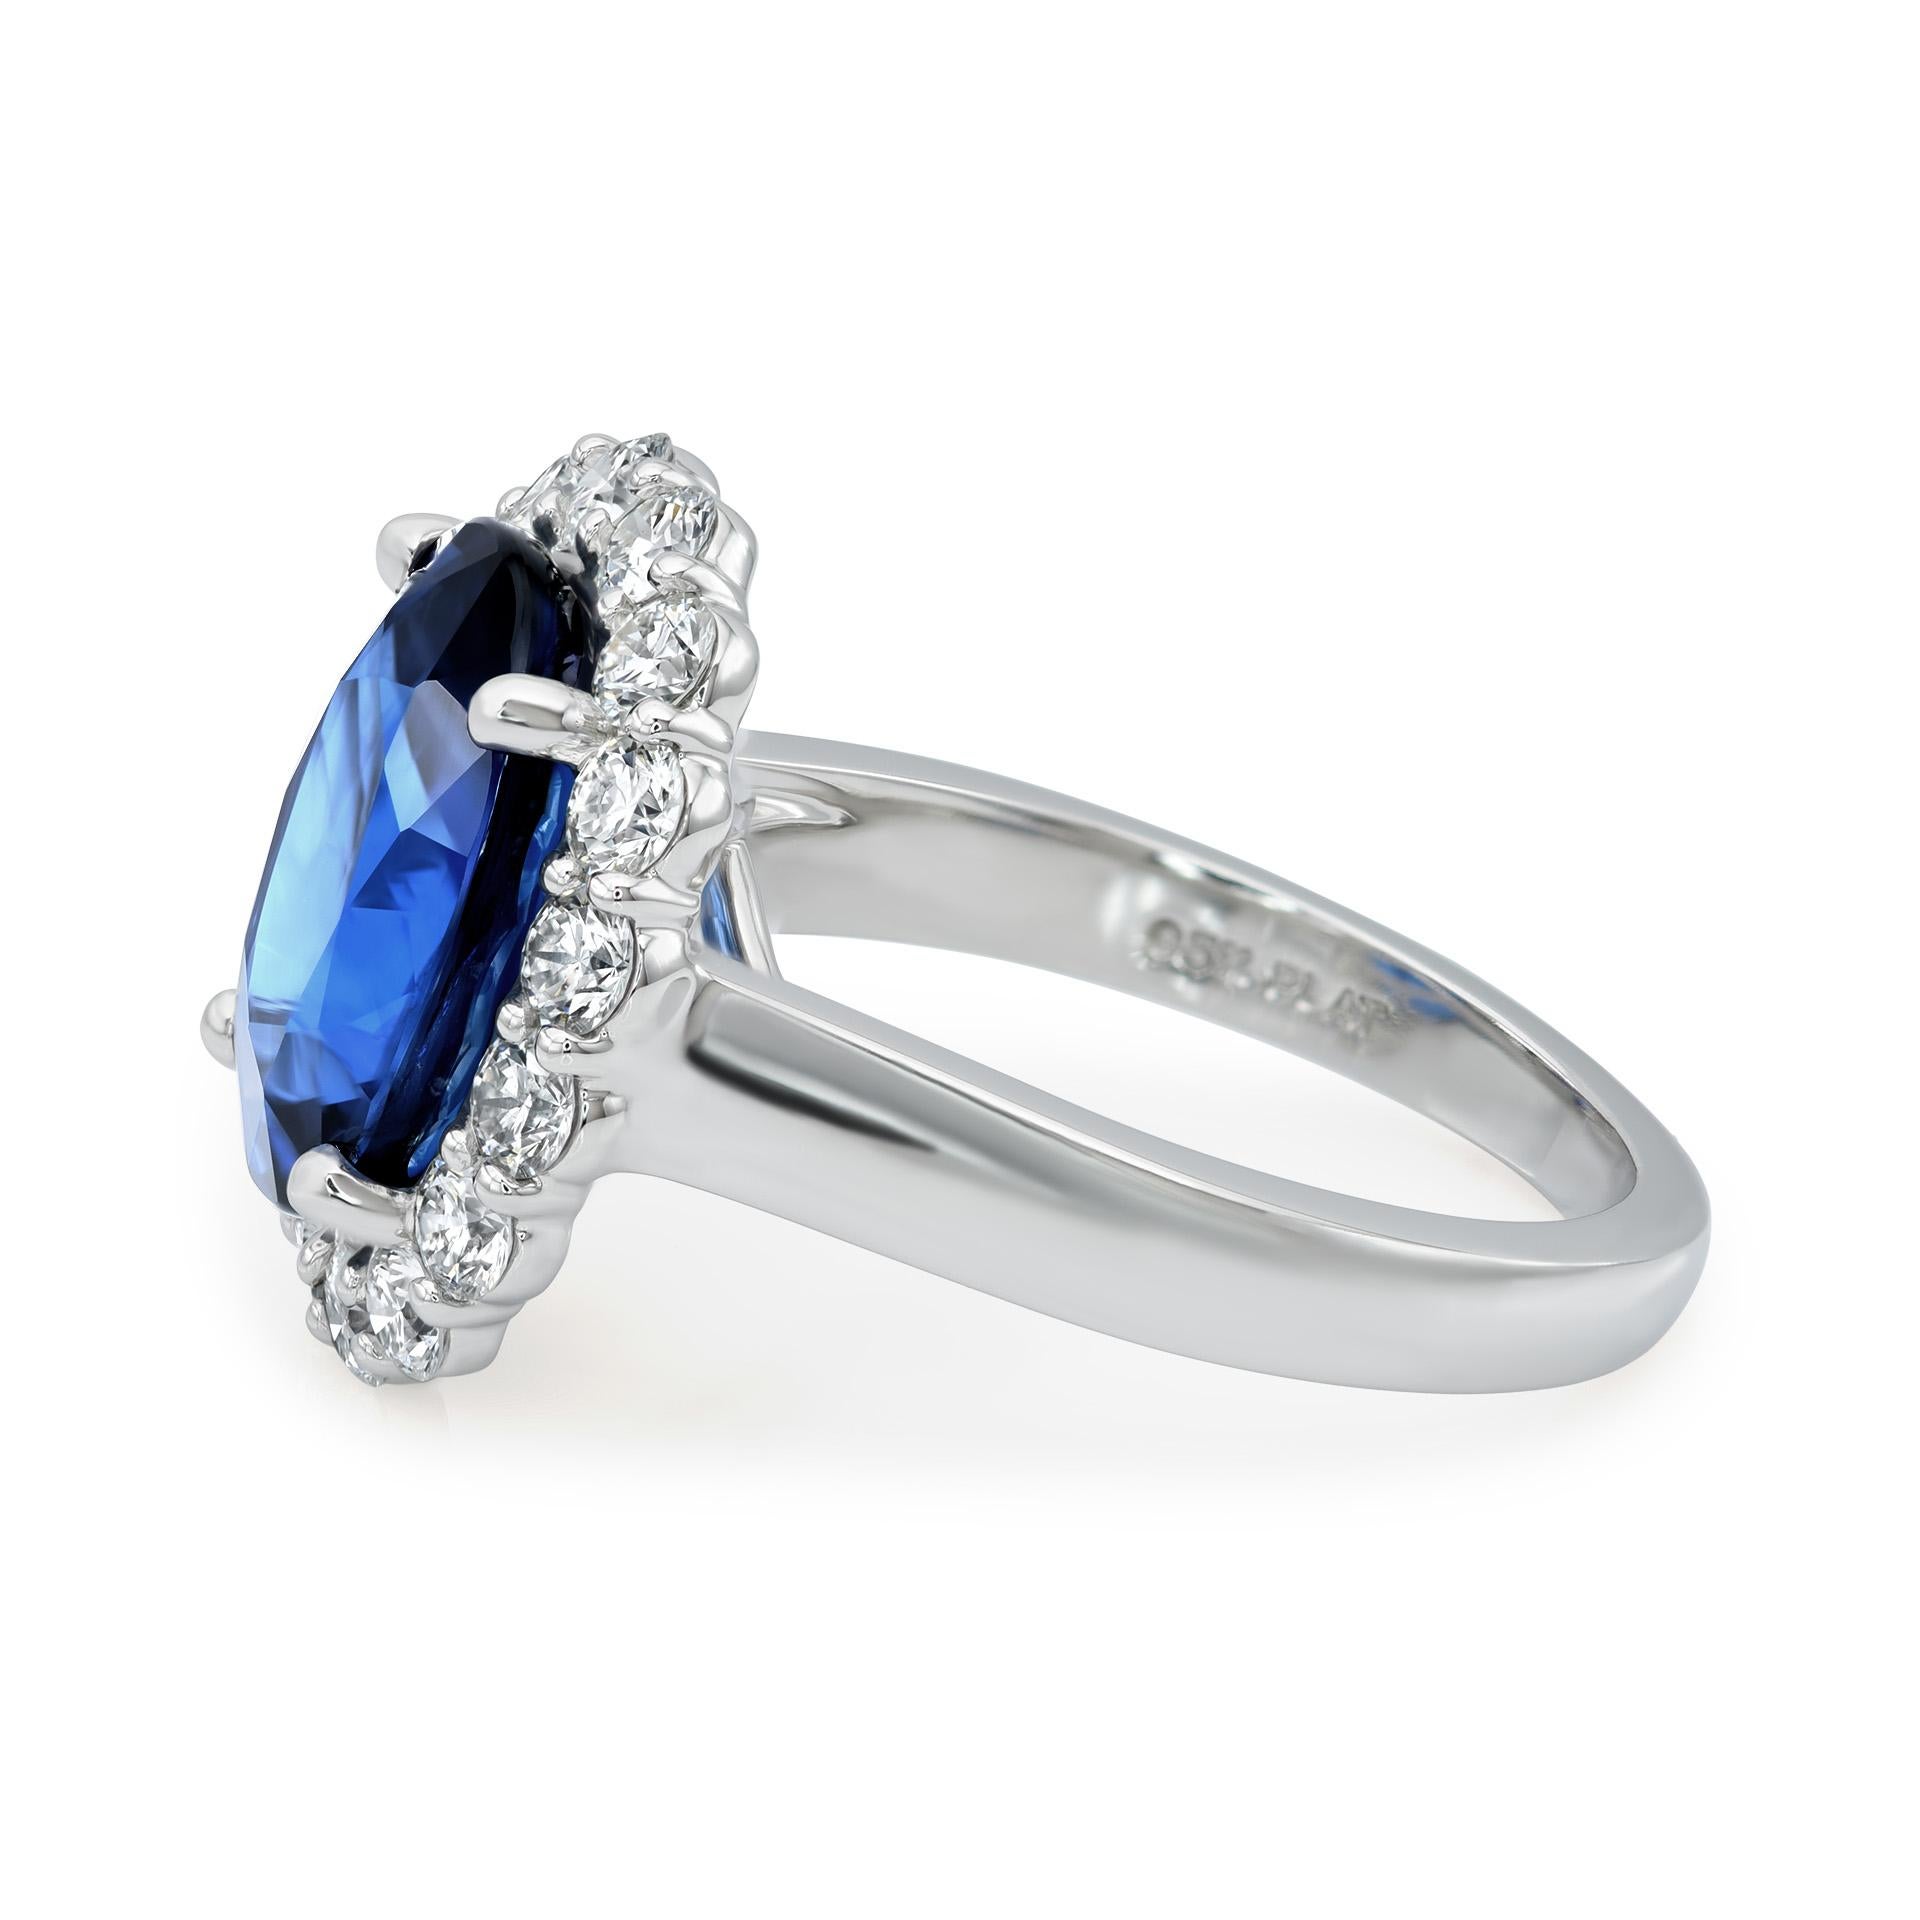 Brilliant Cut GIA Certified 7.03 carats Natural Blue Sapphire set in Platinum Diamond Ring  For Sale